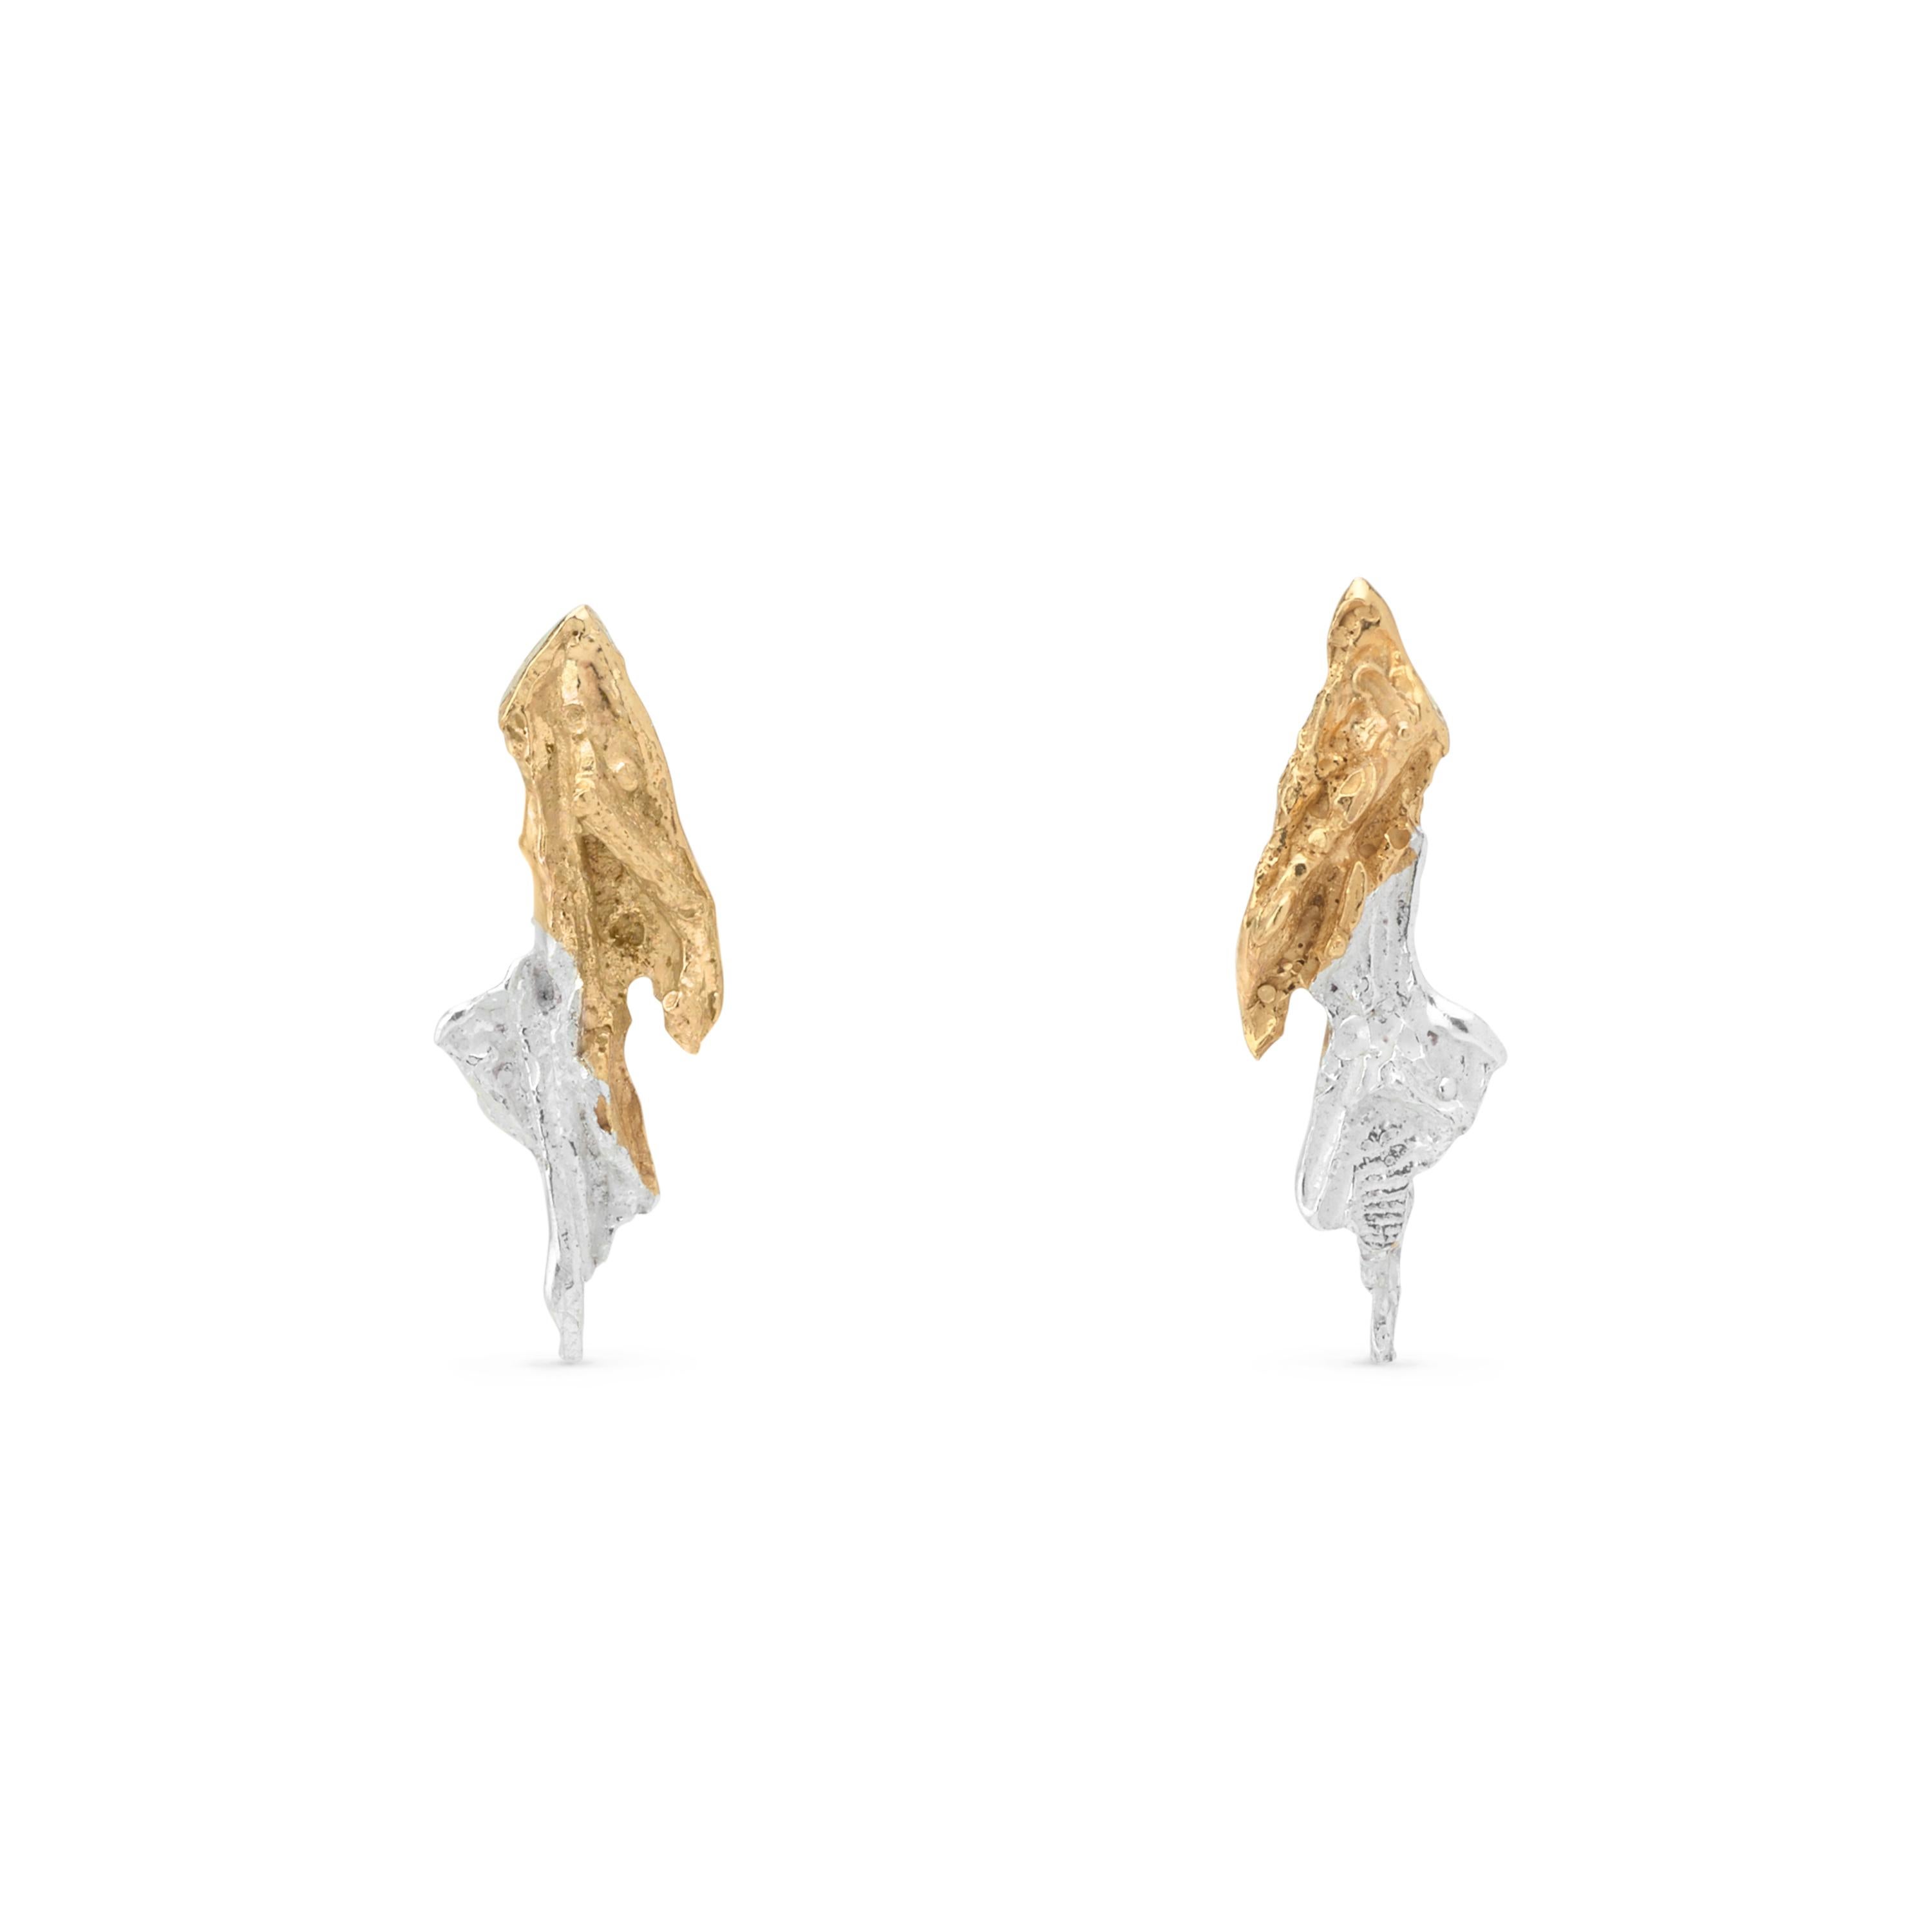 Aria is Italian for ‘air’, and this pair of earrings possess a shape and texture that is every bit as light and graceful as their namesake. Aria is also the term, in classical music, for an expressive solo vocal performance that forms part of a